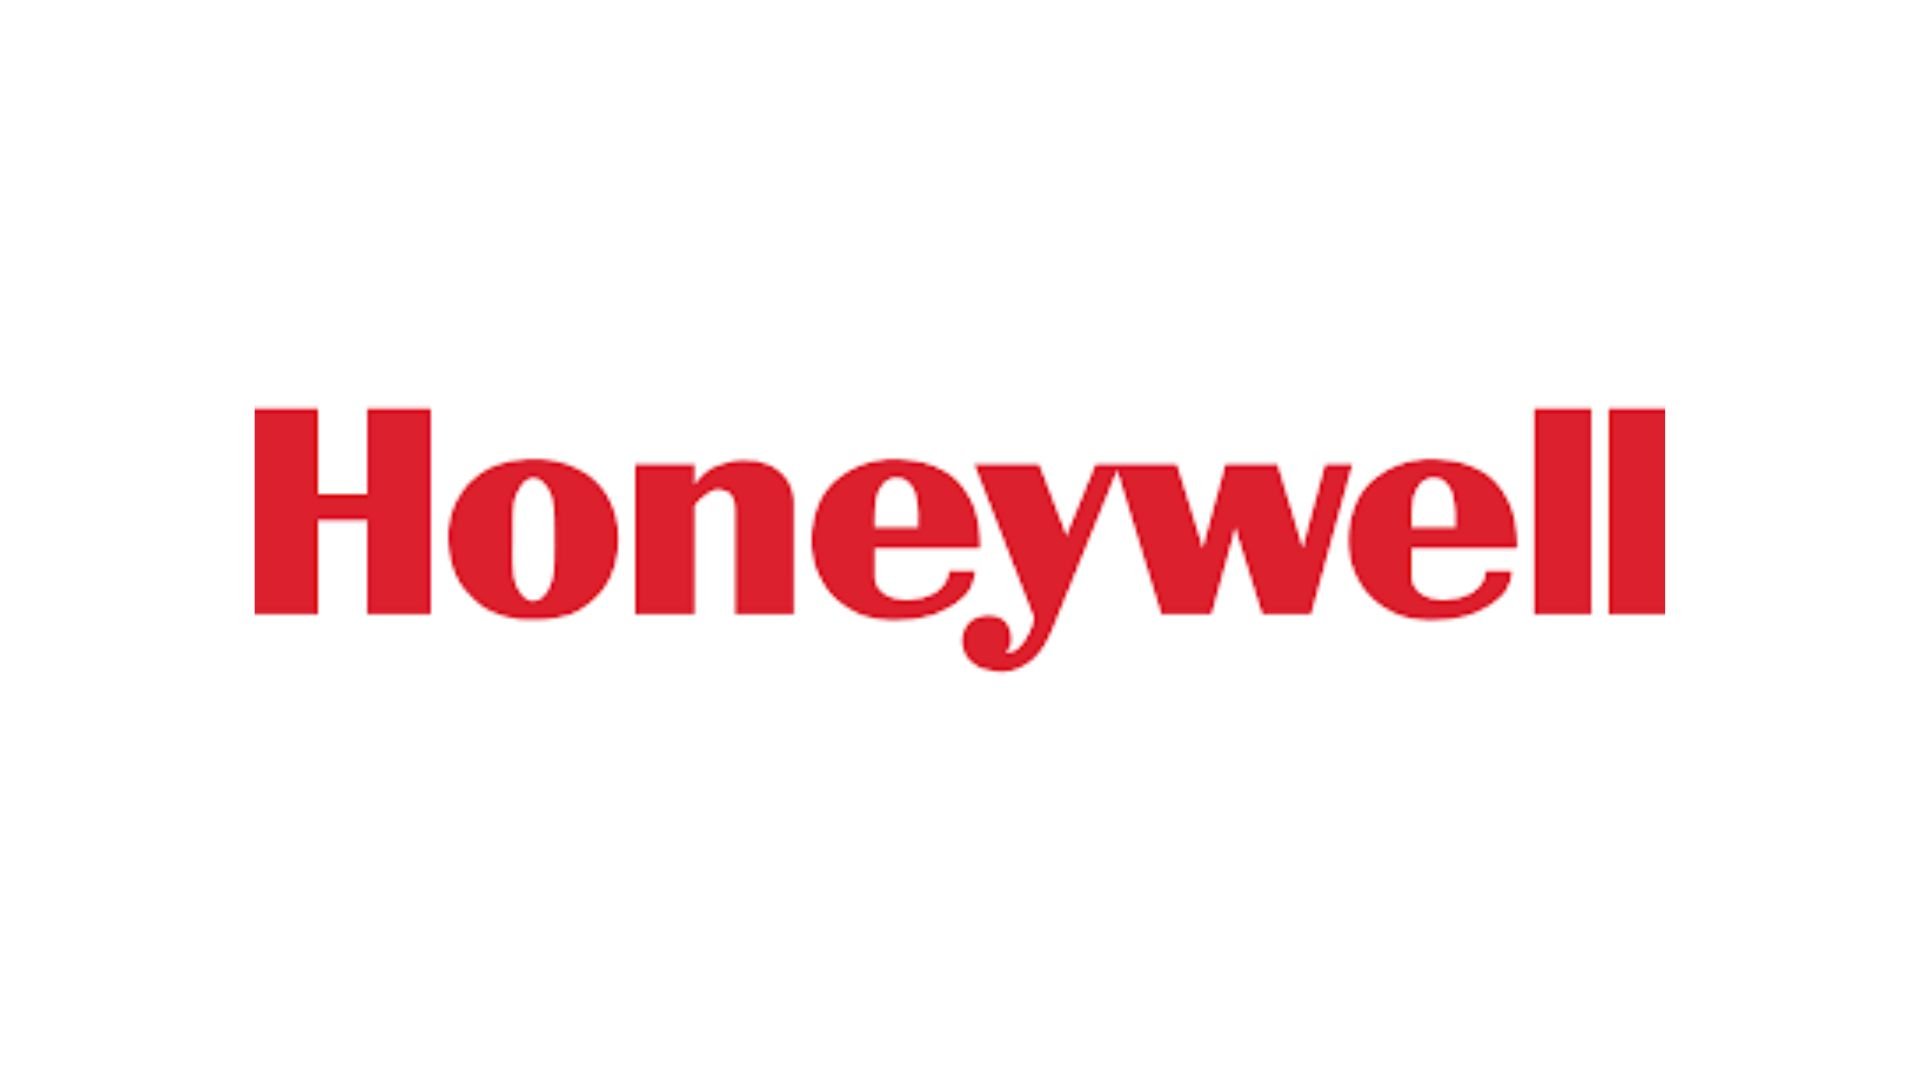 CLS Service Works with the Honeywell.jpg